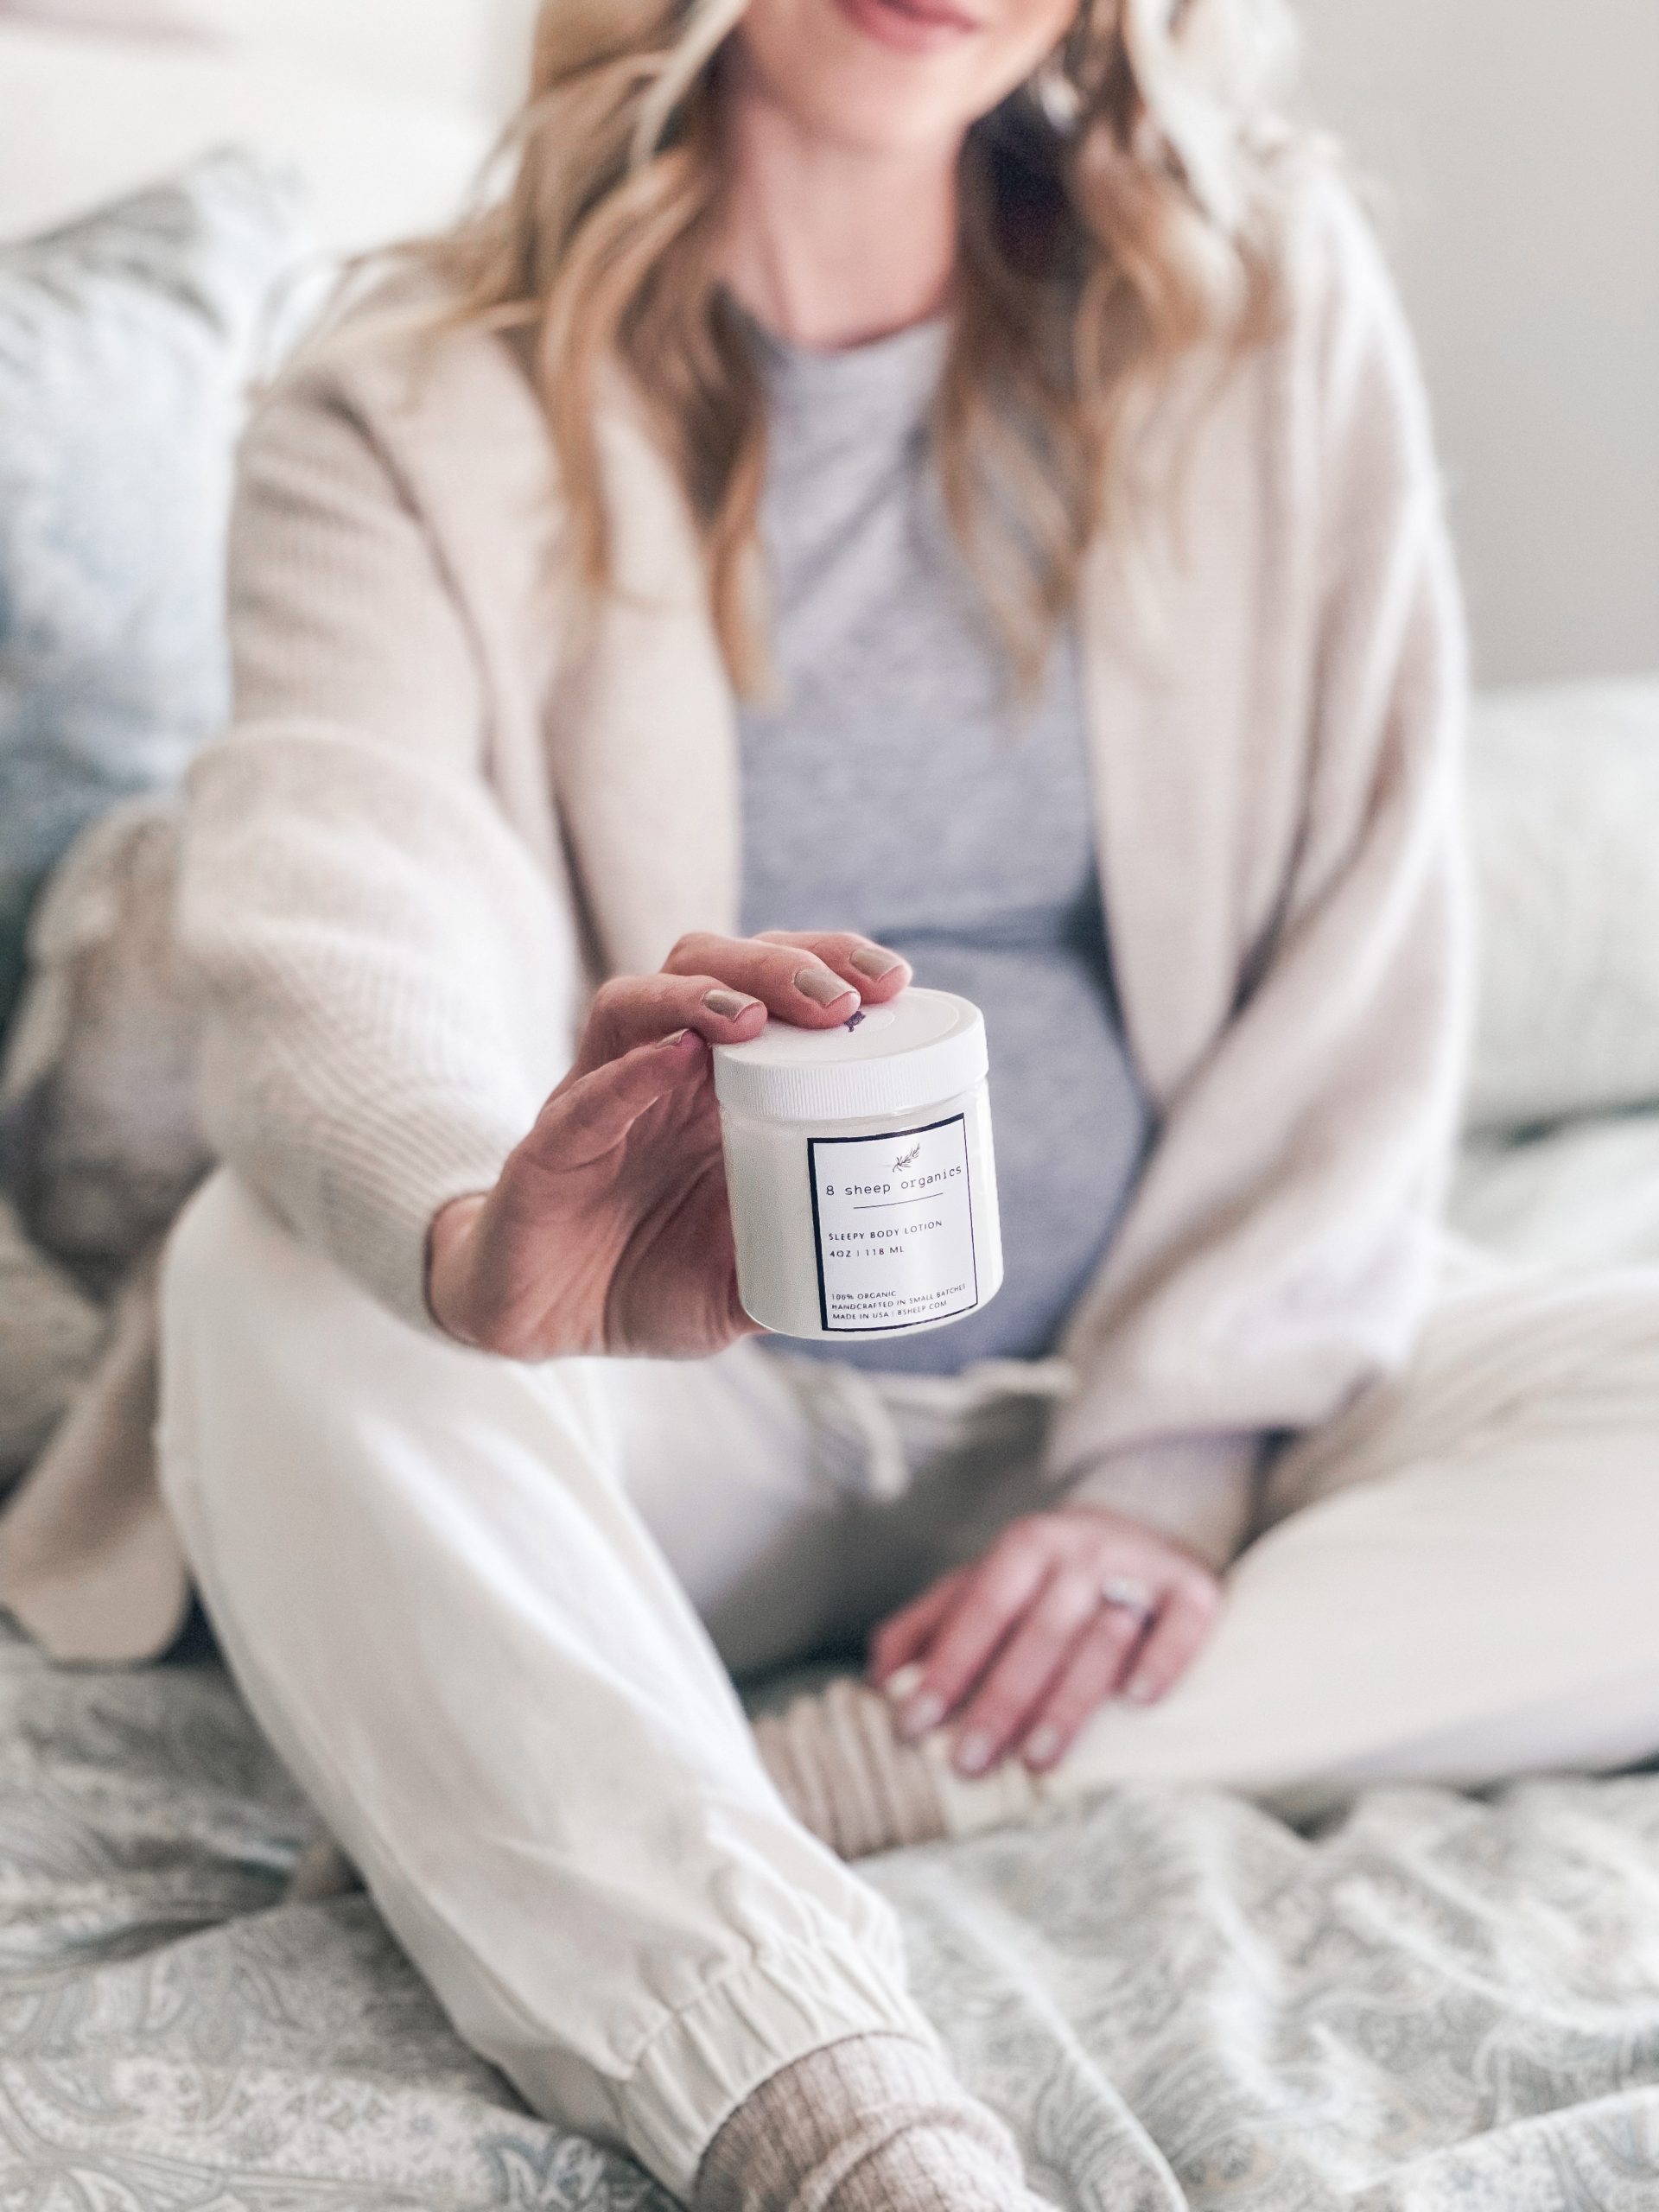 Meagan Brandon fashion blogger of Meagan's Moda reviews 8 Sheep Organics sleepy body lotion with magnesium for pregnancy aches and pains